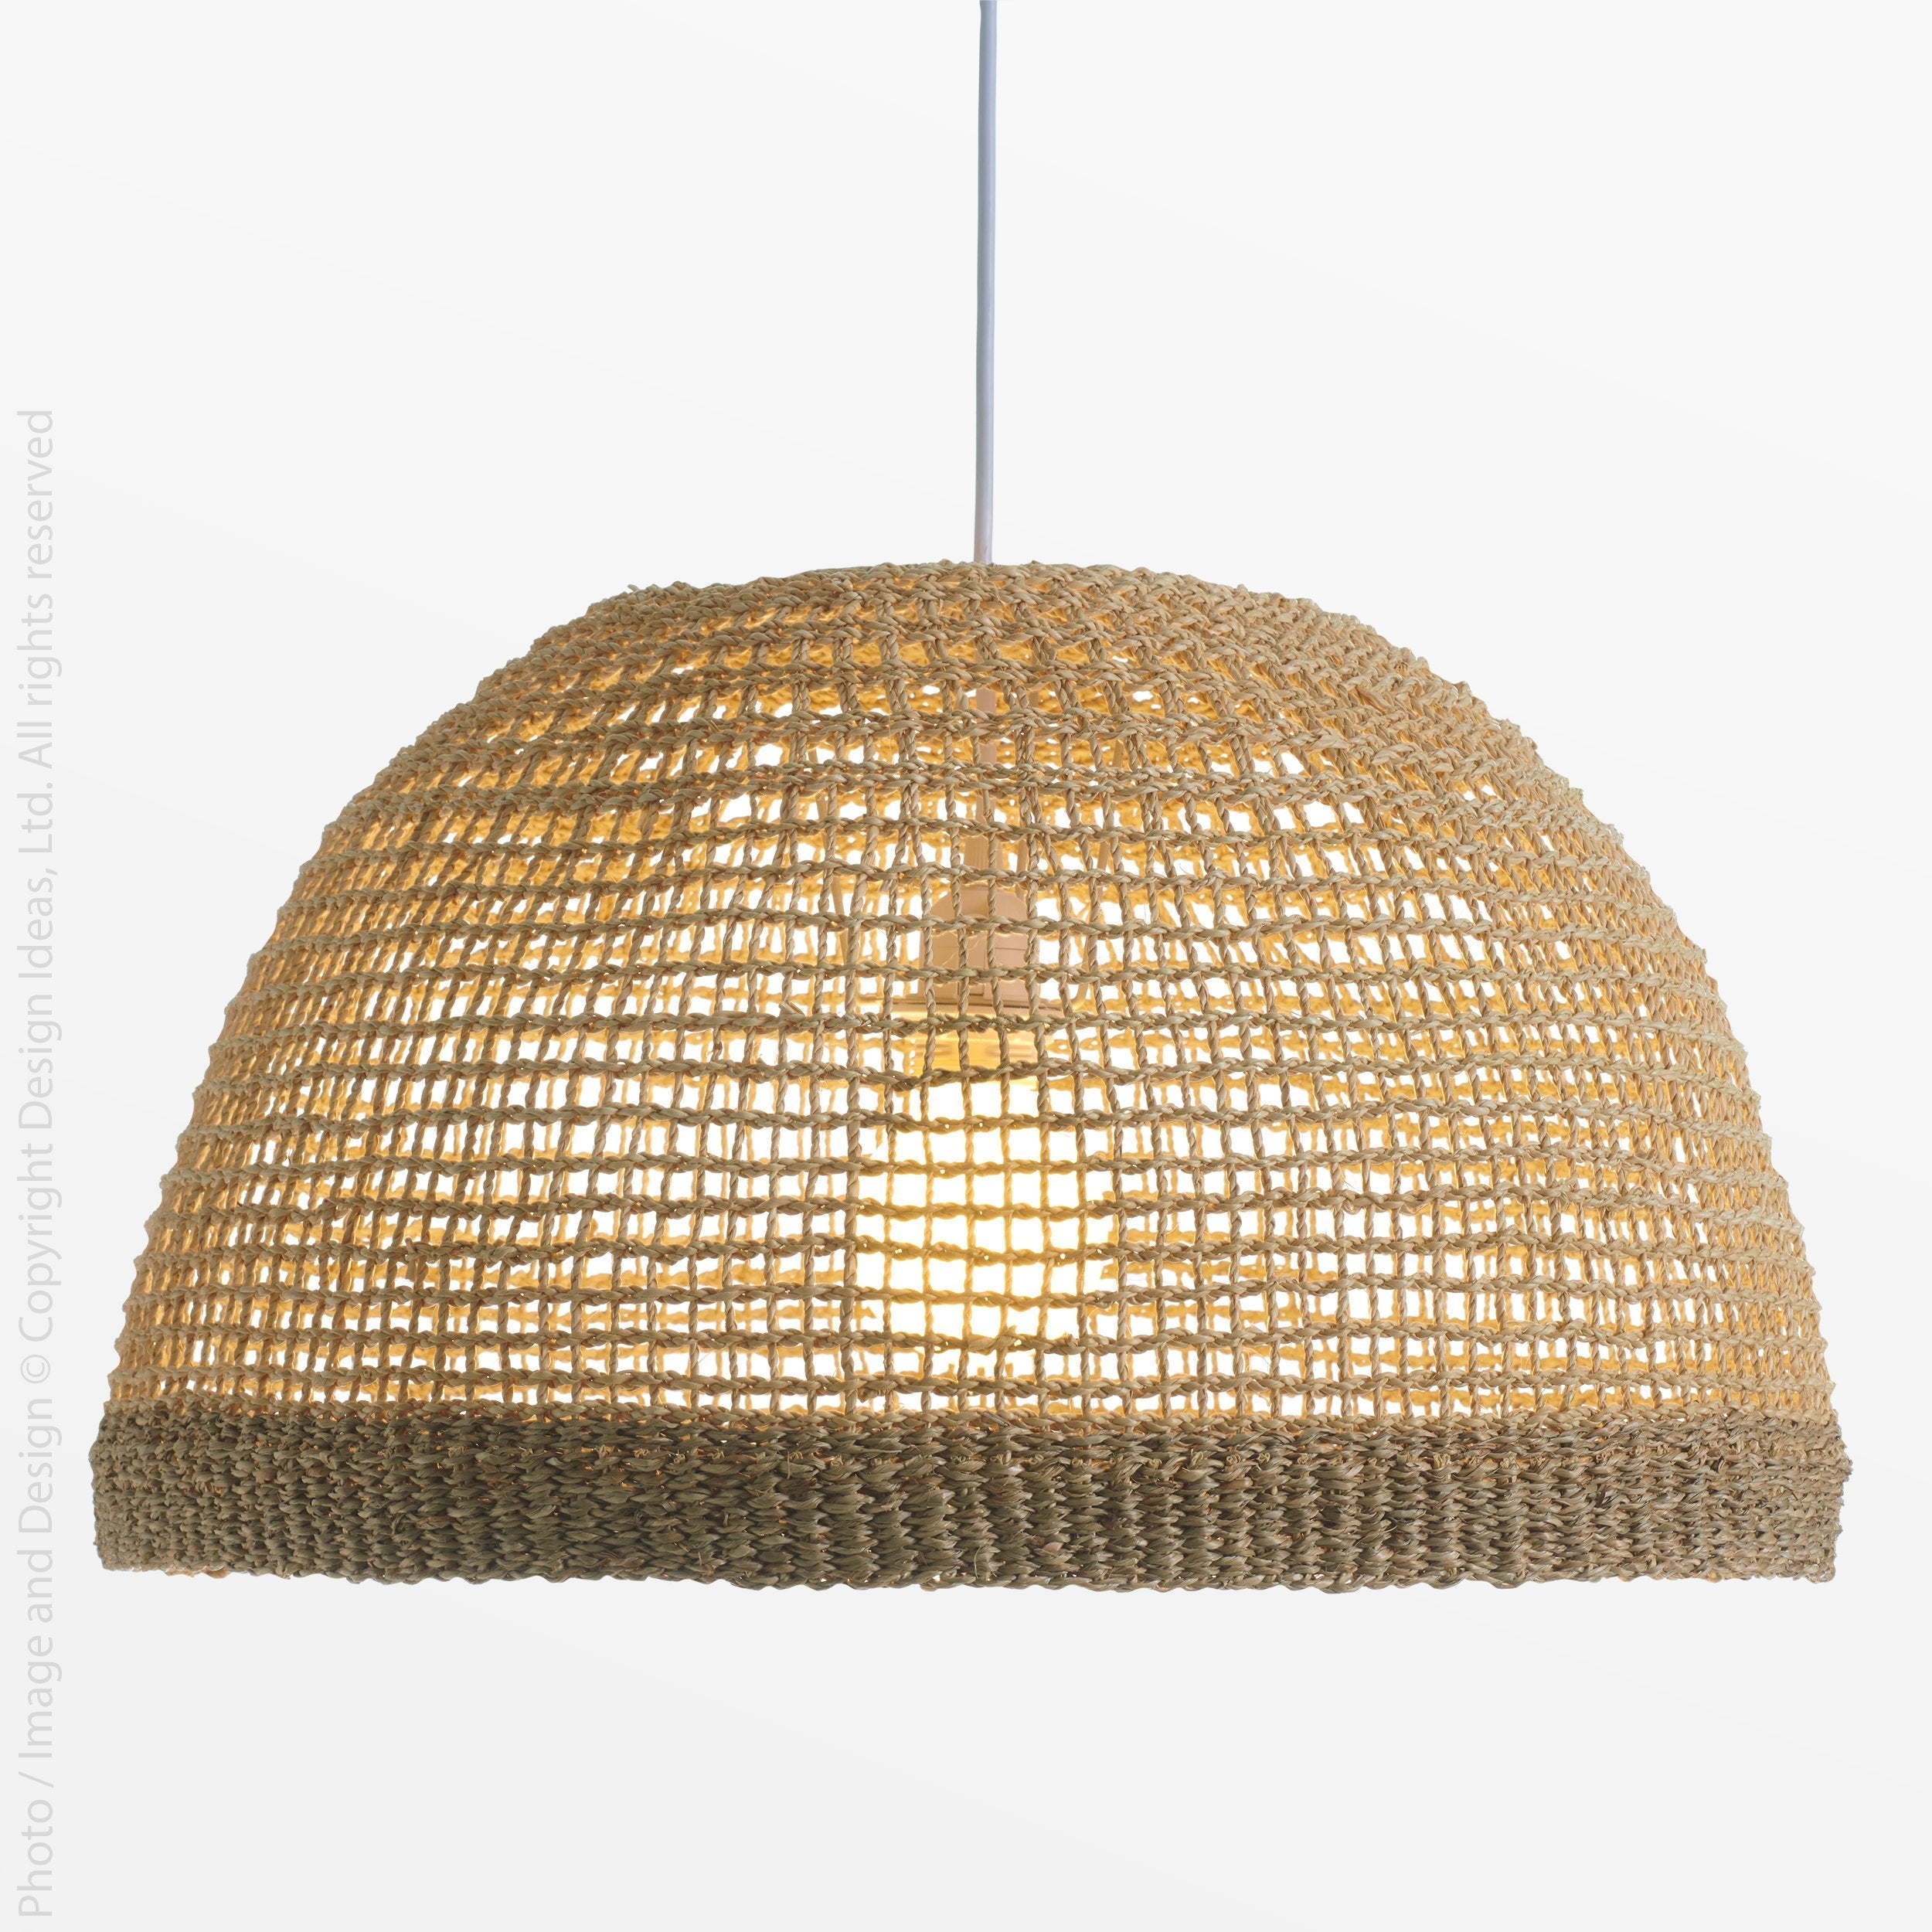 Cayman Seagrass Lampshade natural Color | Image 4 | From the Cayman Collection | Exquisitely handmade with natural seagrass for long lasting use | Available in natural color | texxture home